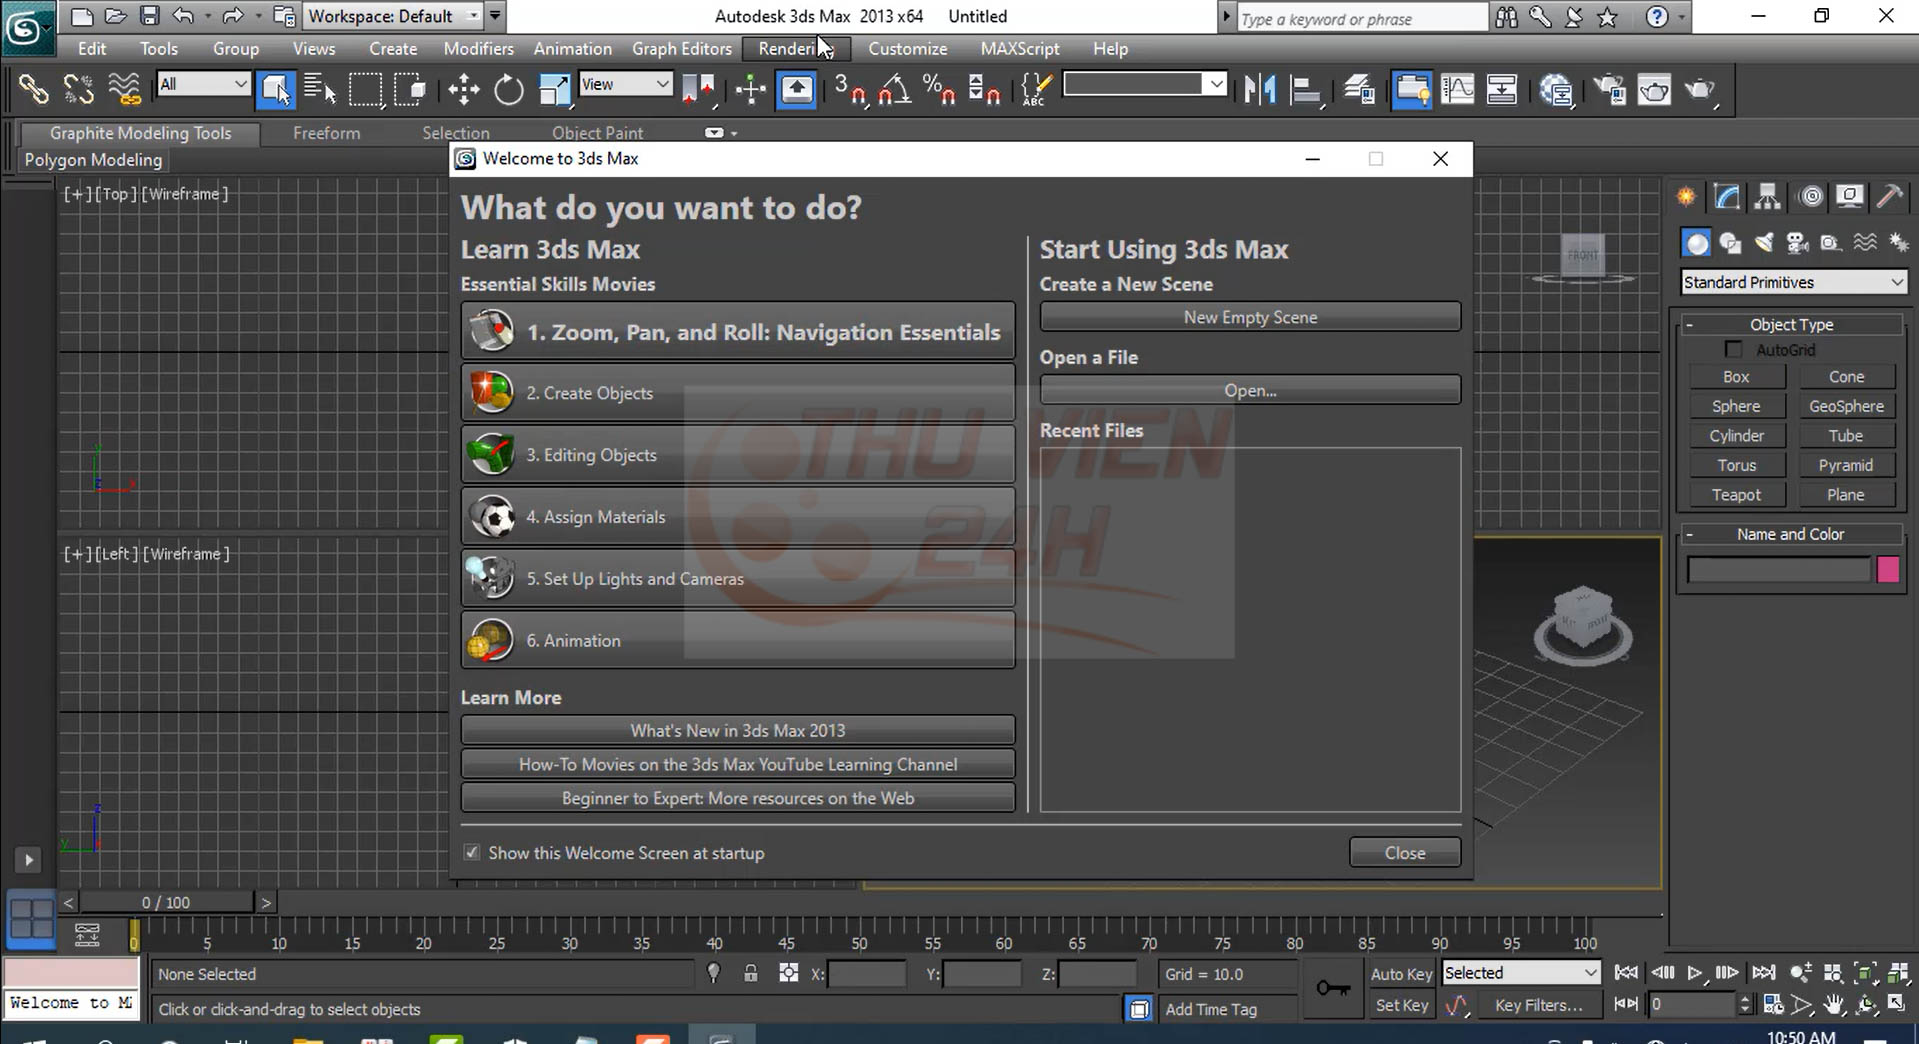  giao diện 3ds Max 2013